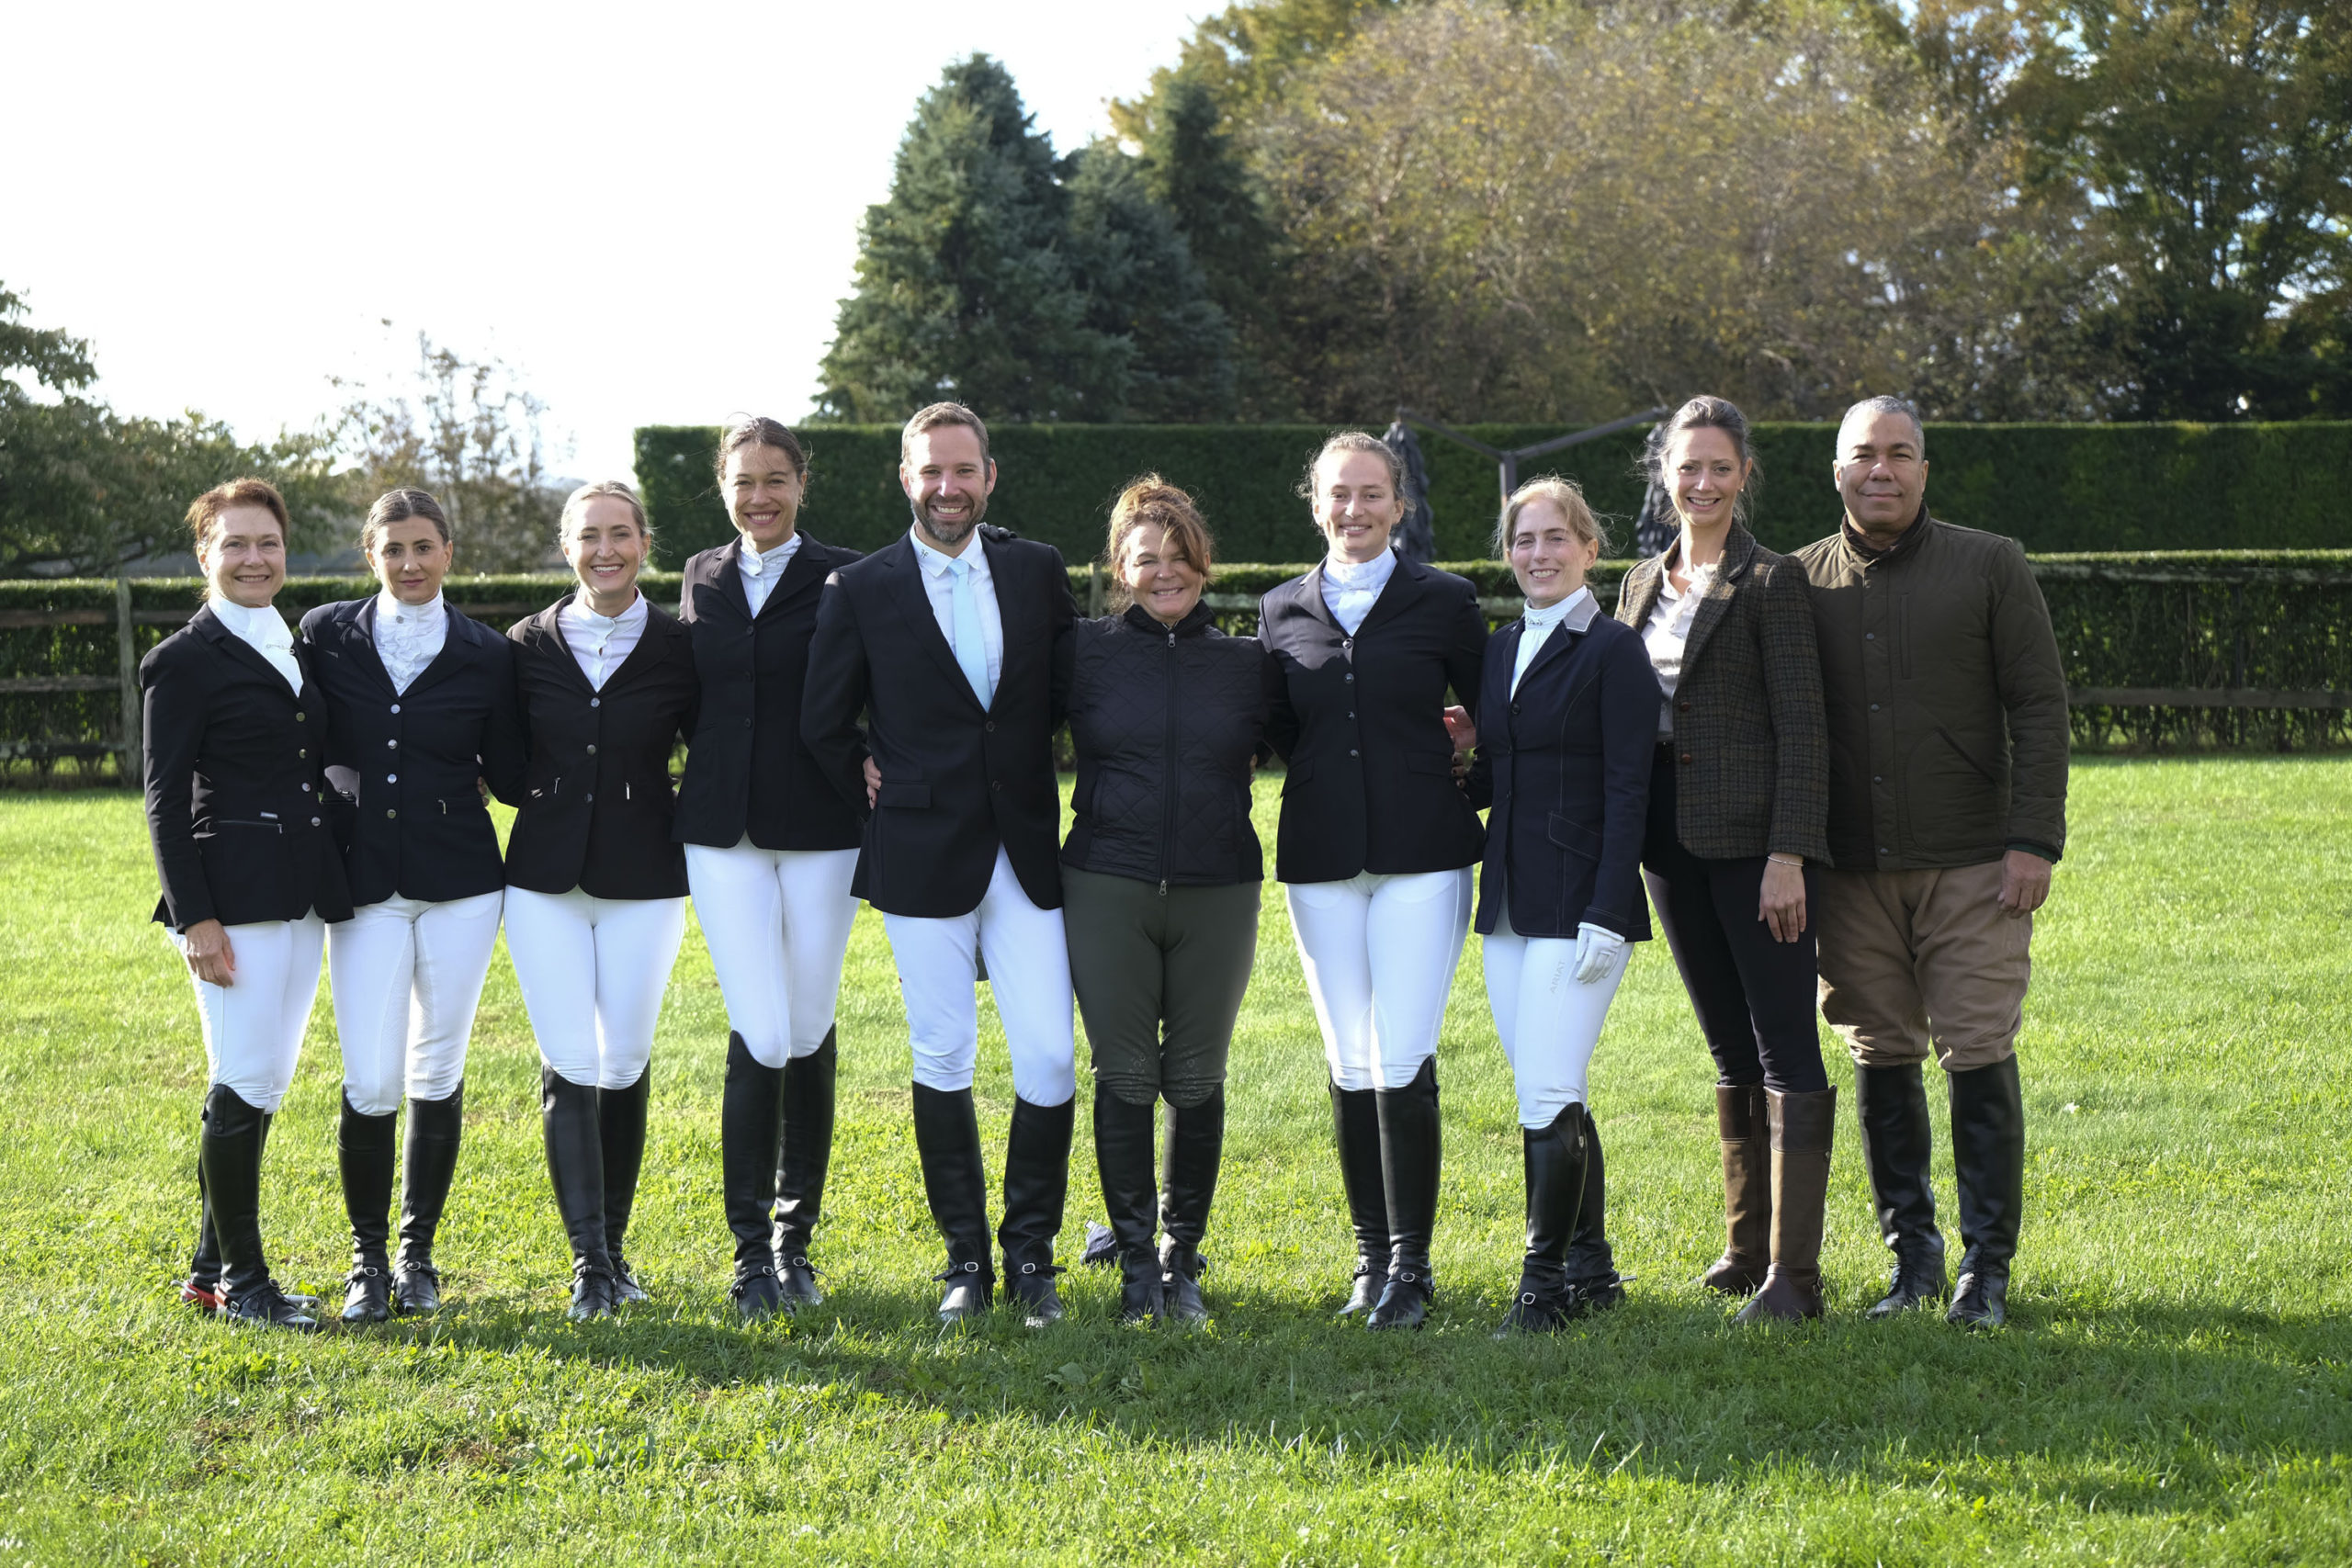 Diana Shiel, Natalie Mattson, Amalie Bandelier, Andressa Costa, Chris Ritchey, Rebecca Robin Wilson, Megan McCaffrey, Sandi Bresnick, Suzanne Hall, and Valentino Carlotti at Robin Stables inaugural “Fall Fling,”  Dressage Horse Show at Mecox Bay Farms in Bridgehampton on October 31.The event was directed and produced by renowned international Trainer and past member of the British Equestrian Team, Rebecca Robin Wilson. Throughout the day, seven riders competed in various professional dressage tests ranging from Introductory to Freestyle. The event culminated in awards with Andressa Costa of Sag Harbor taking home Grand Champion and Chris Ritchey of East Hampton, Reserve Champion.  ROB RICH